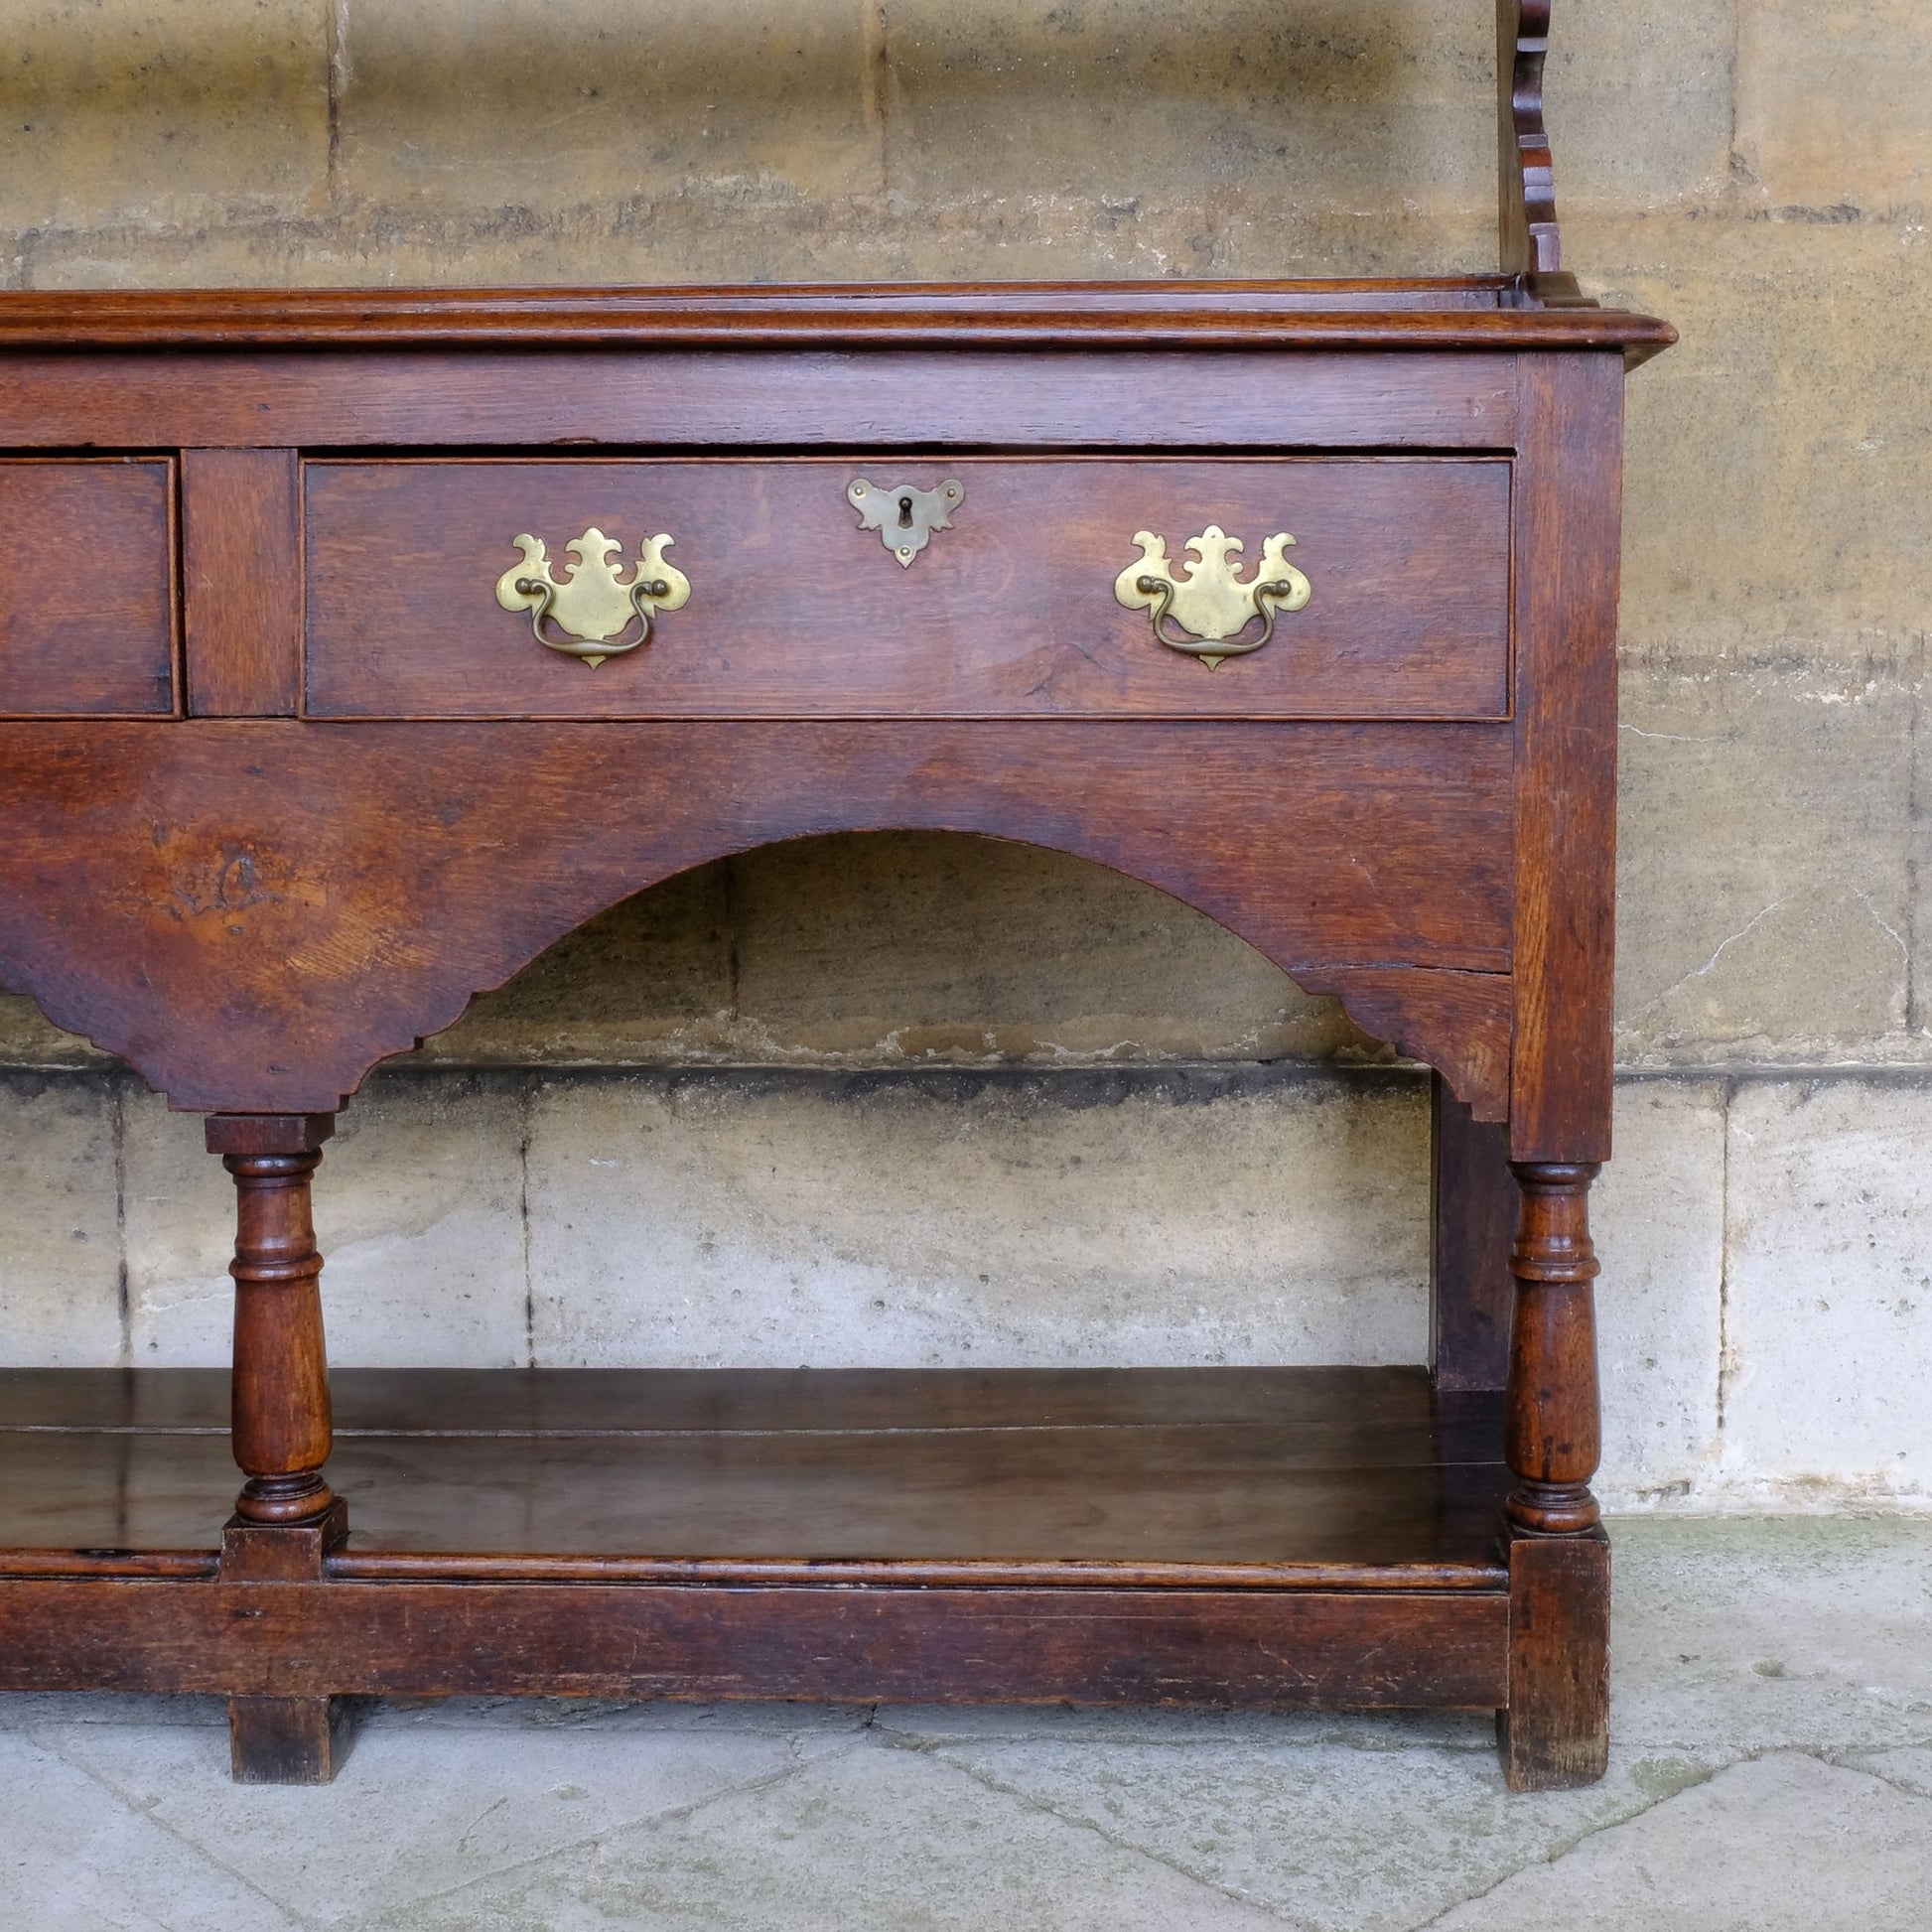 An 18th century dresser in a beautiful rich oak, with open plate shelves over a two drawer base with a twin arched apron on turned legs with a boarded lower shelf. Various hooks along the three shelves and top. Comes in two pieces for easy transport and maneuver. A delightful patina commensurate with age throughout, with some faint signs of an old green tint to the top of the shelves. In very good solid structural condition.